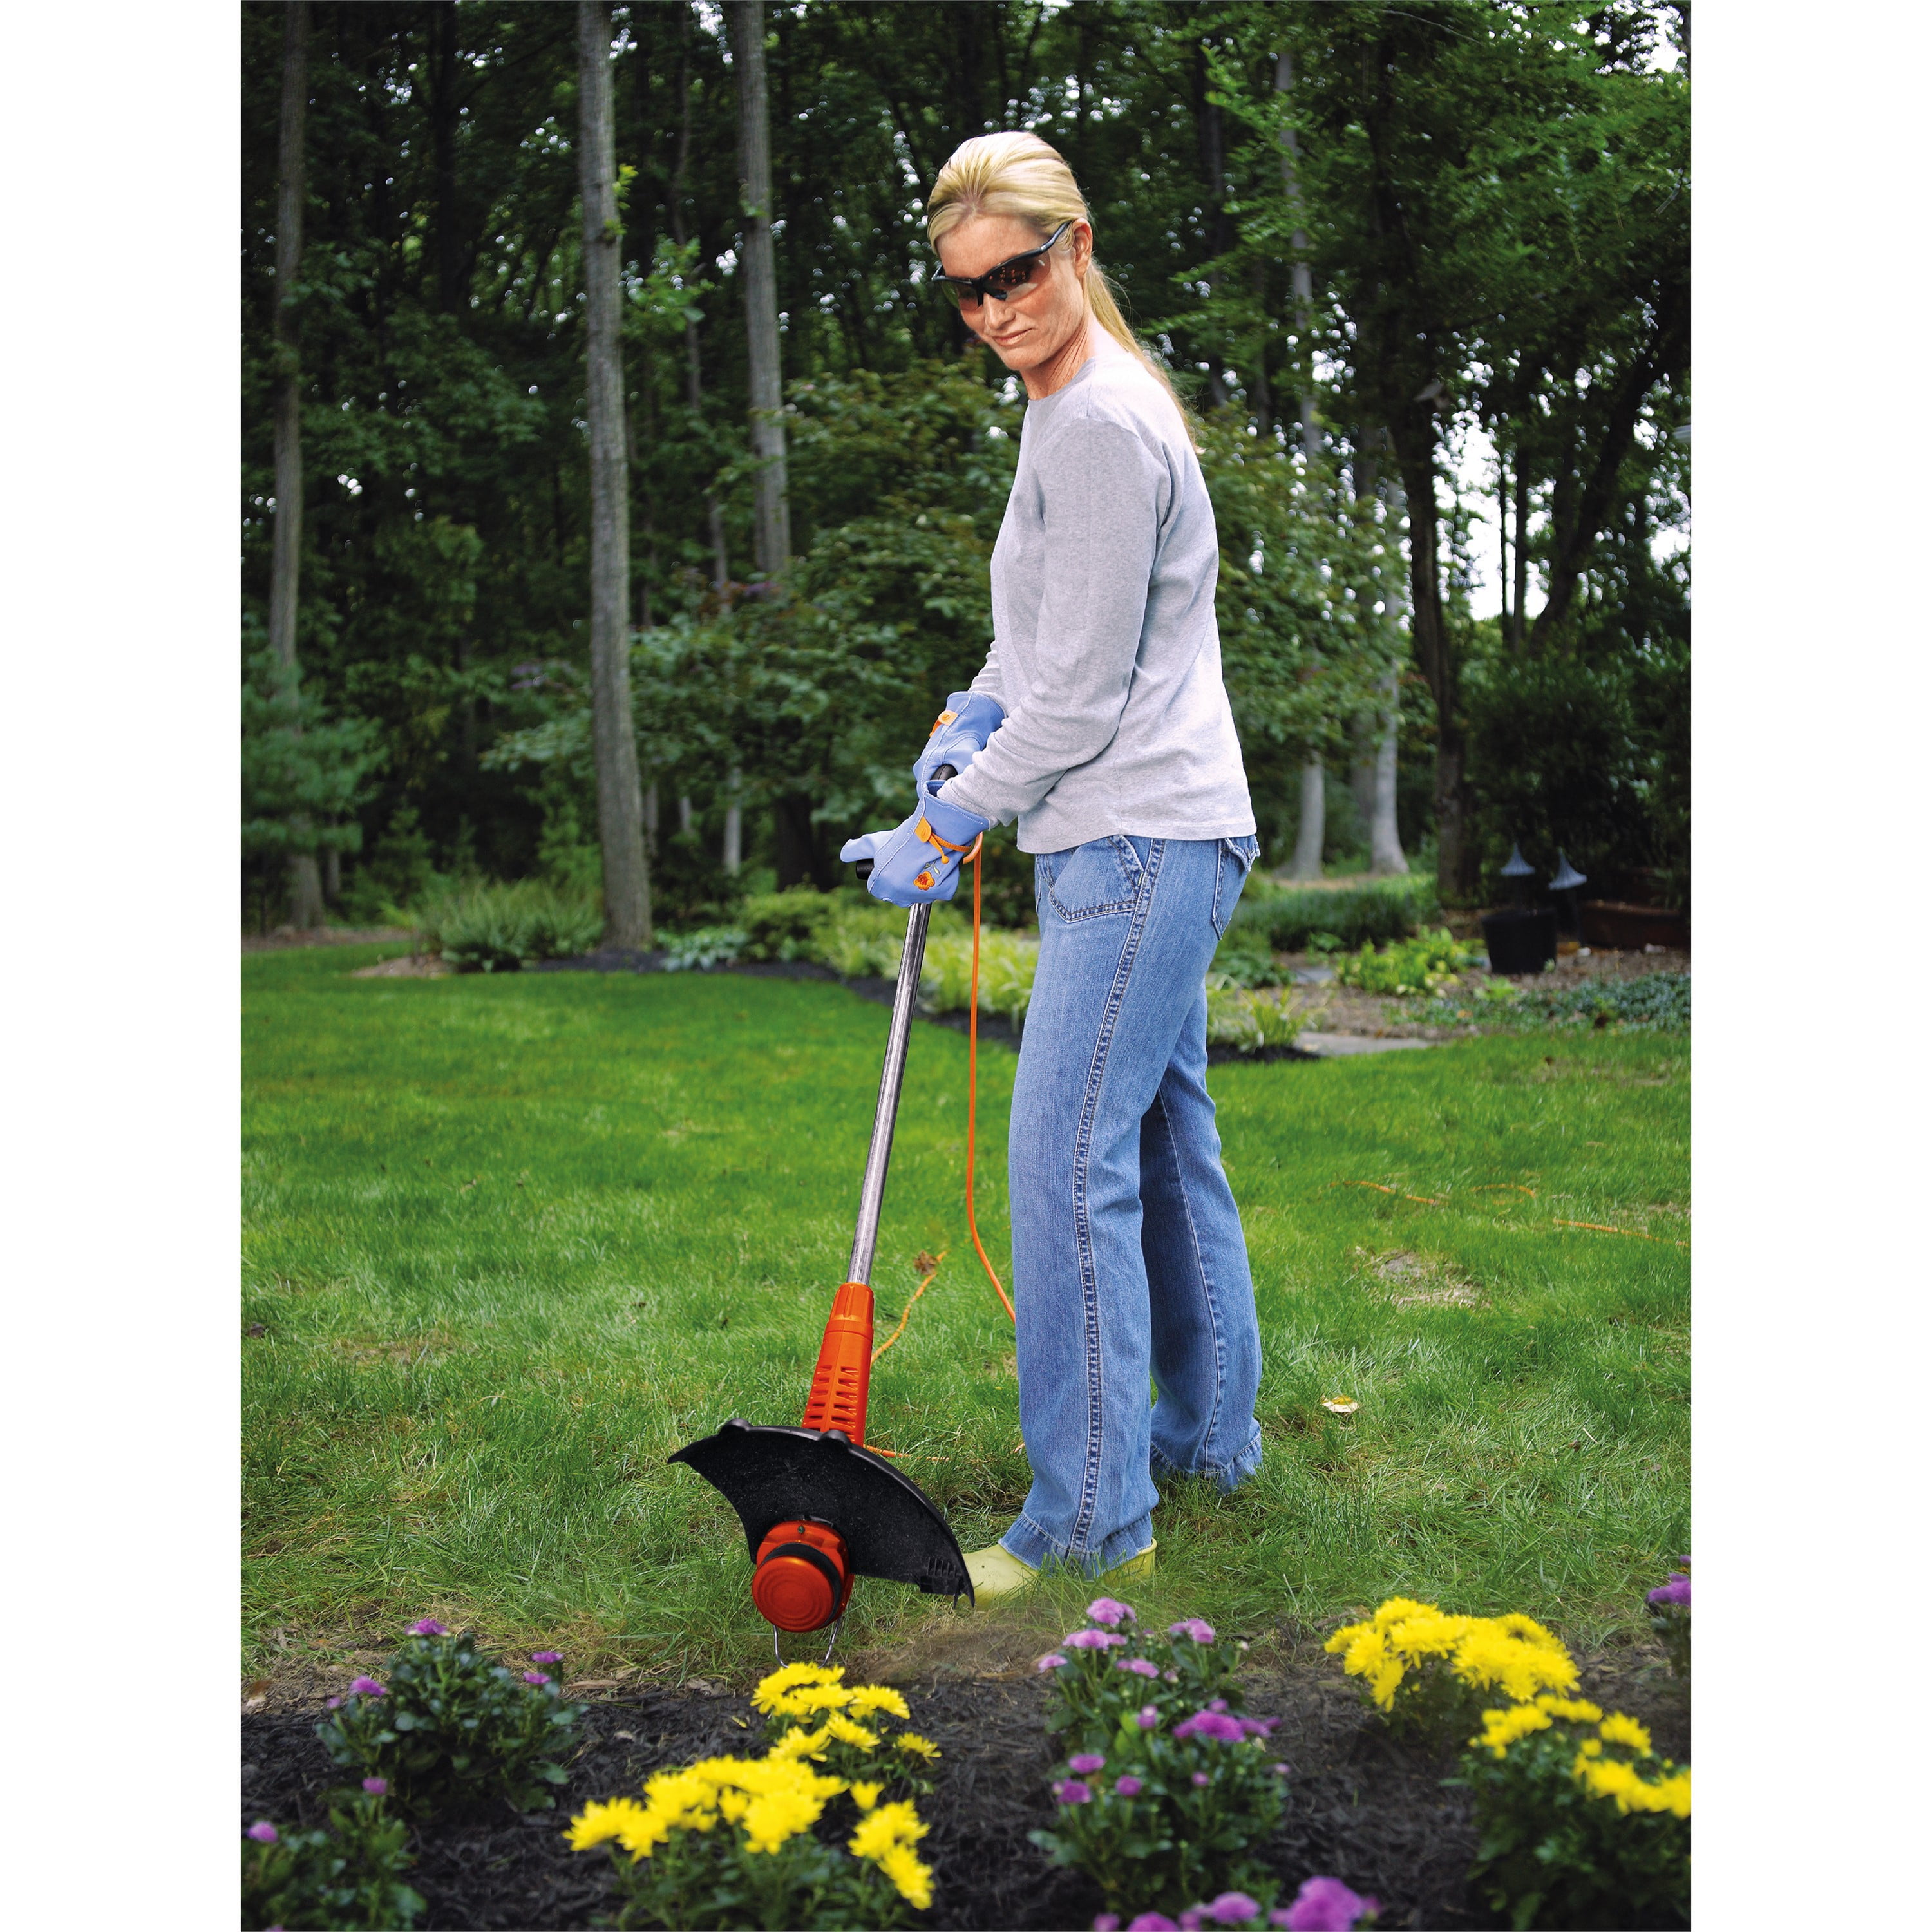 Black & Decker ST7700 Automatic Feed Trimmer & Edger - 13